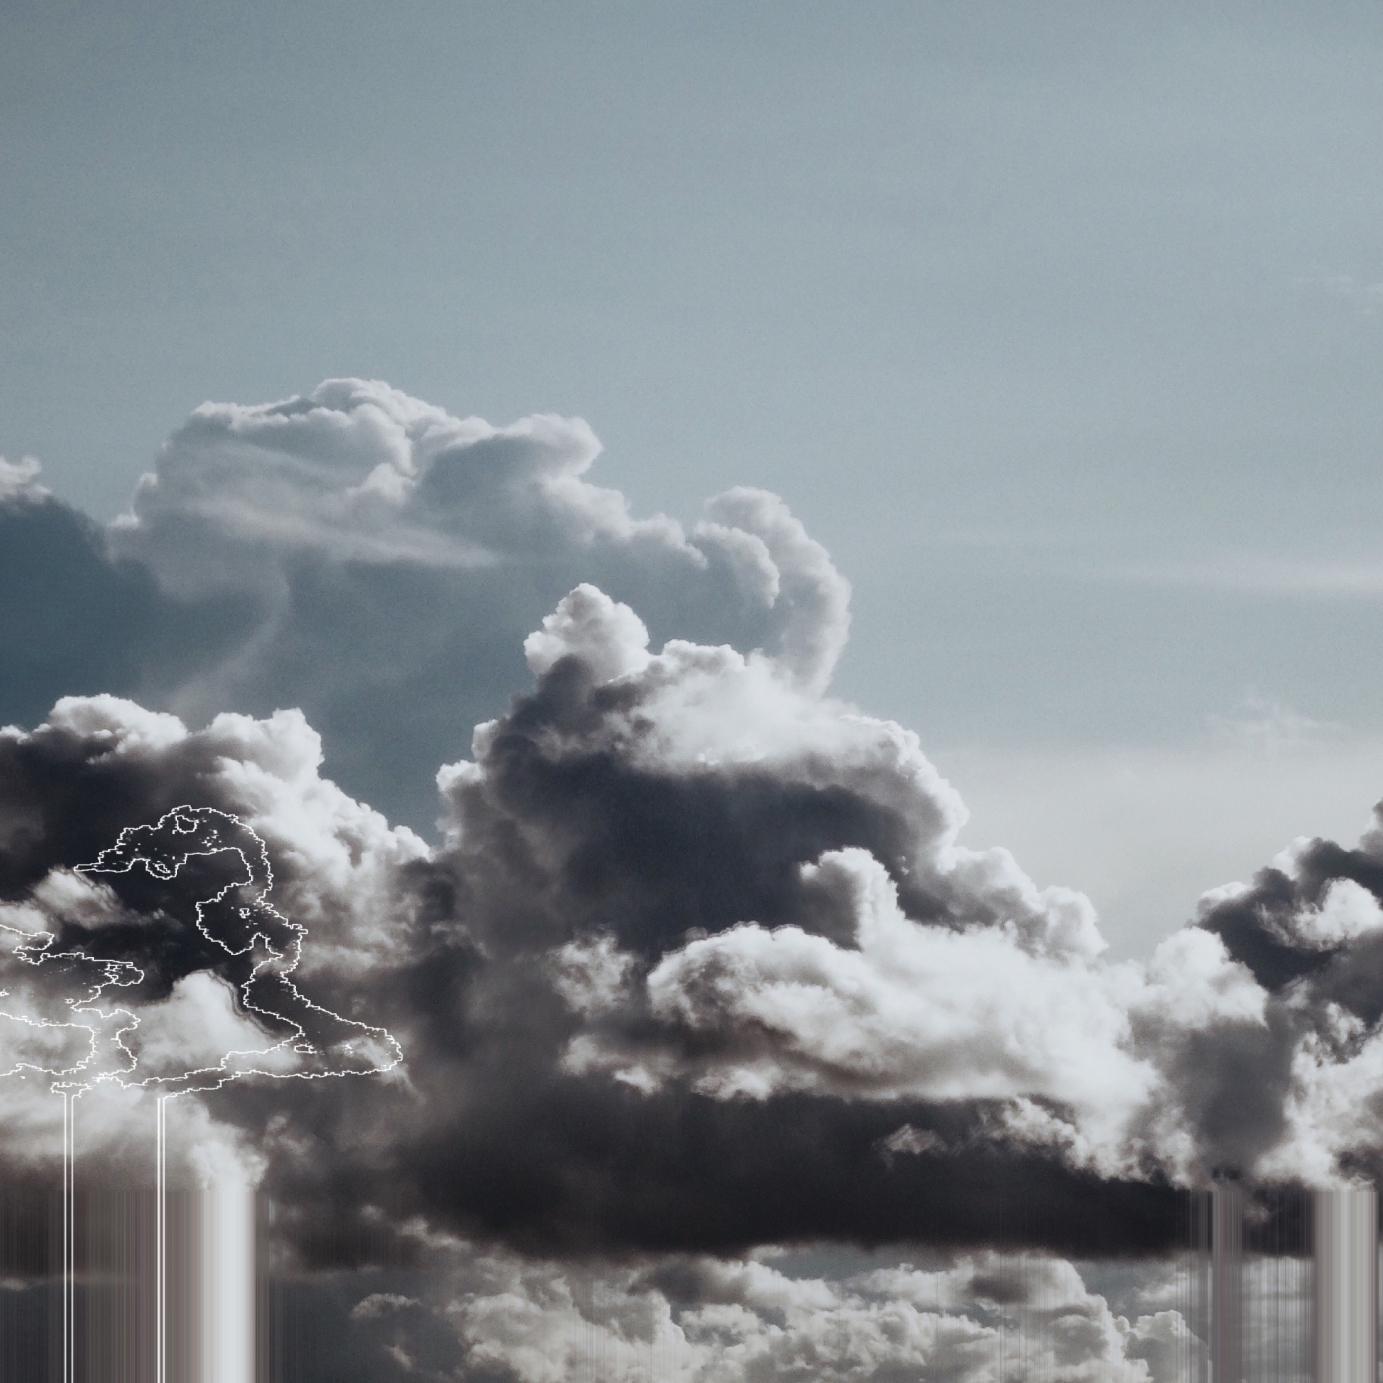 The Aesthetics of Imperfection - Cloud #1